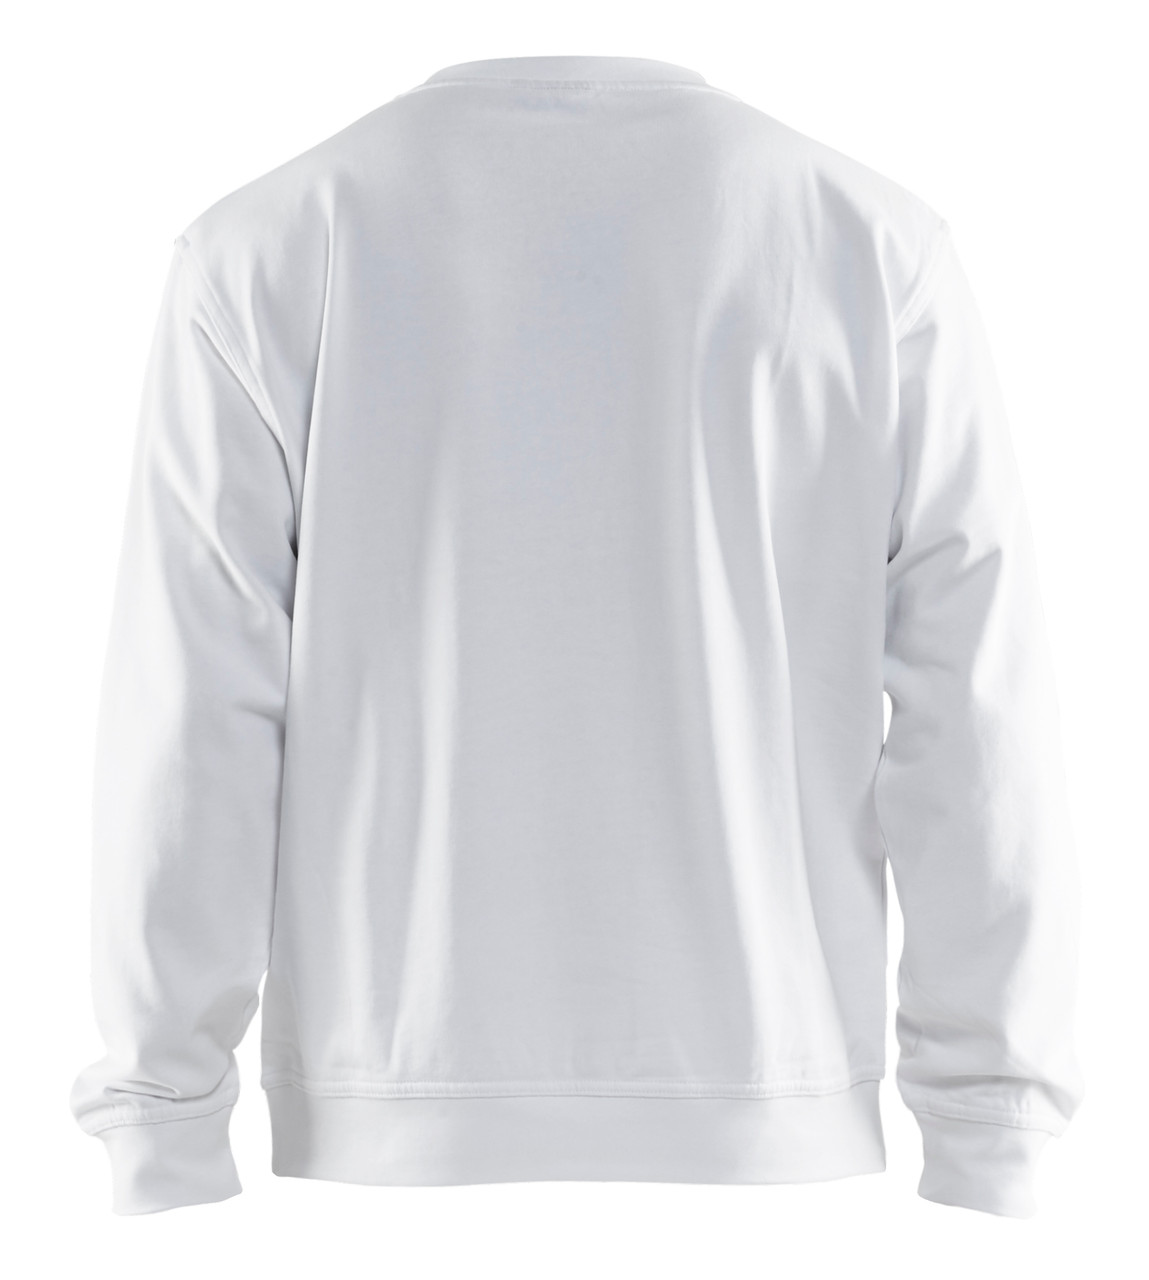 BLAKLADER Cotton White Pullover for Painters that have available in Australia and New Zealand